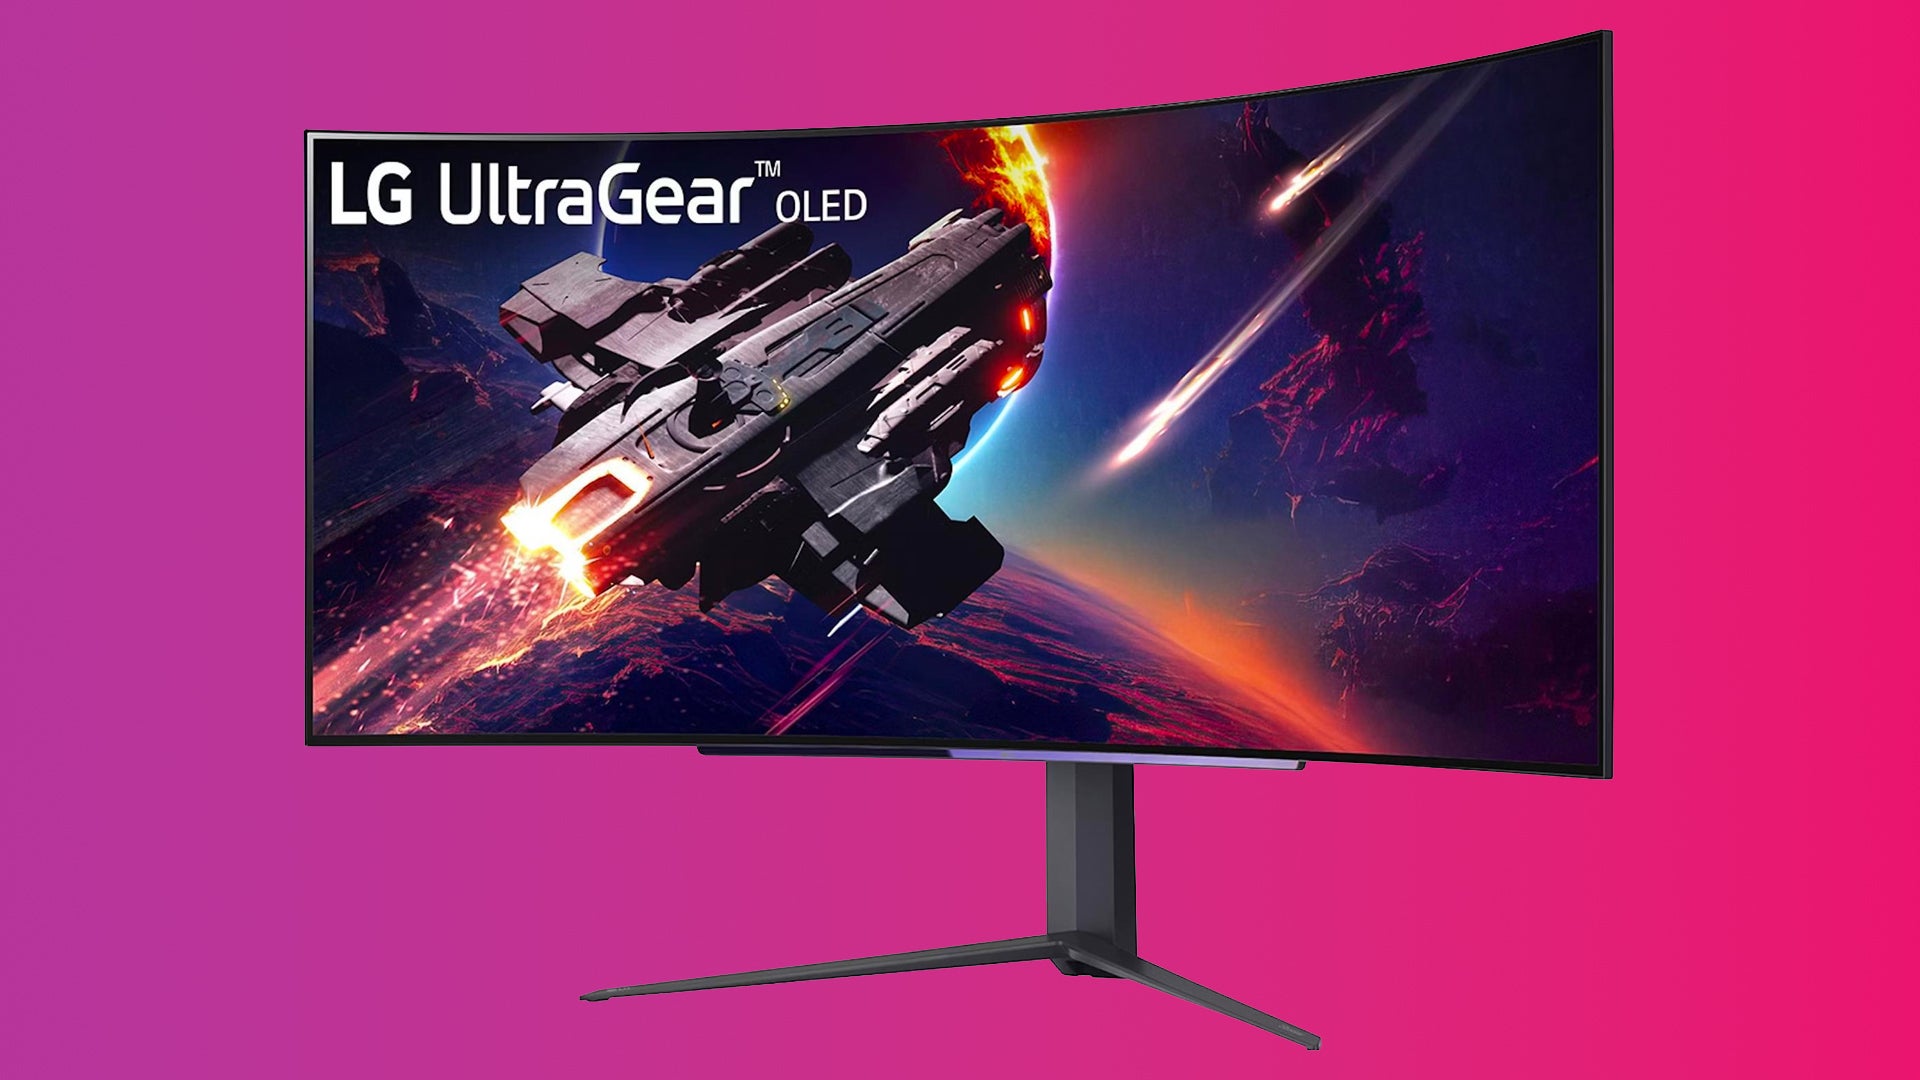 Nab LG's powerful 45-inch 240Hz ultrawide OLED monitor for £500